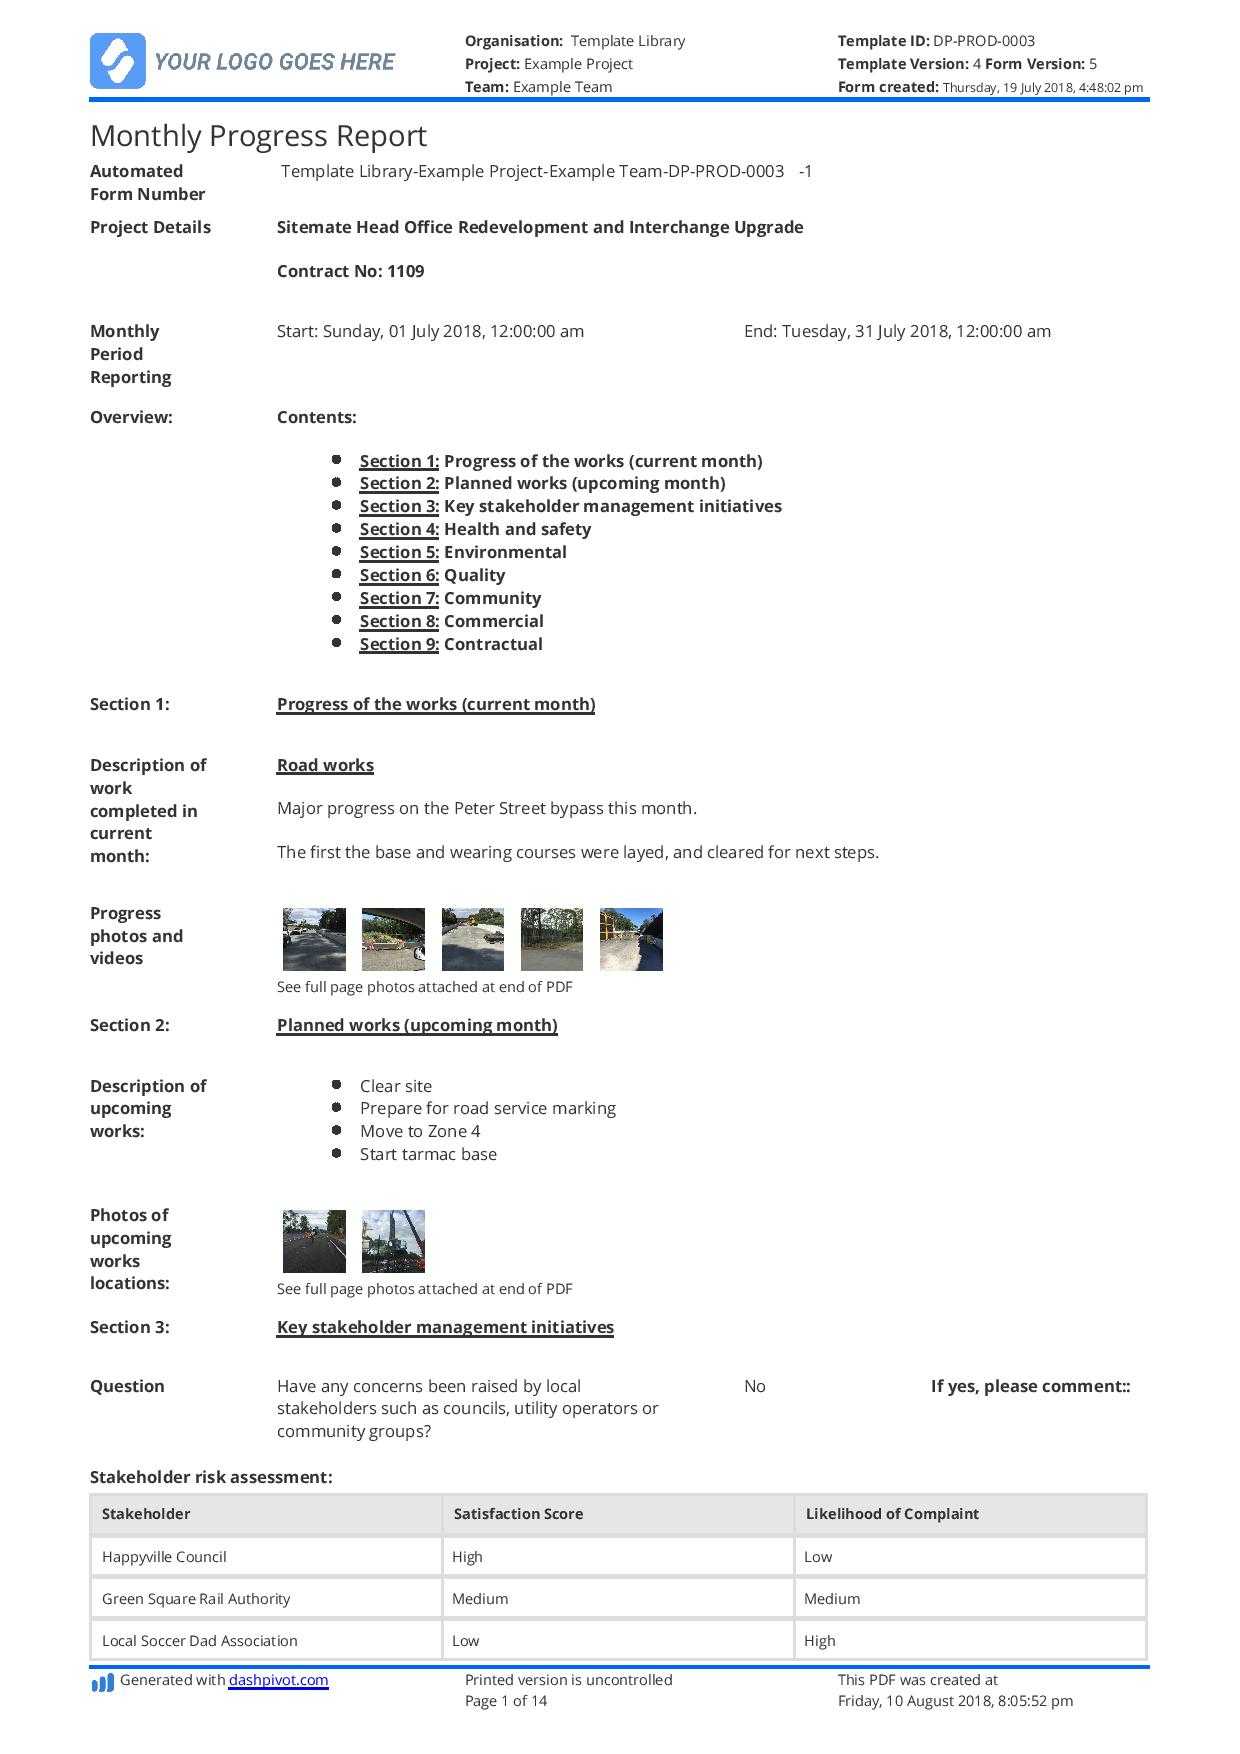 Monthly Construction Progress Report Template: Use This With Progress Report Template For Construction Project